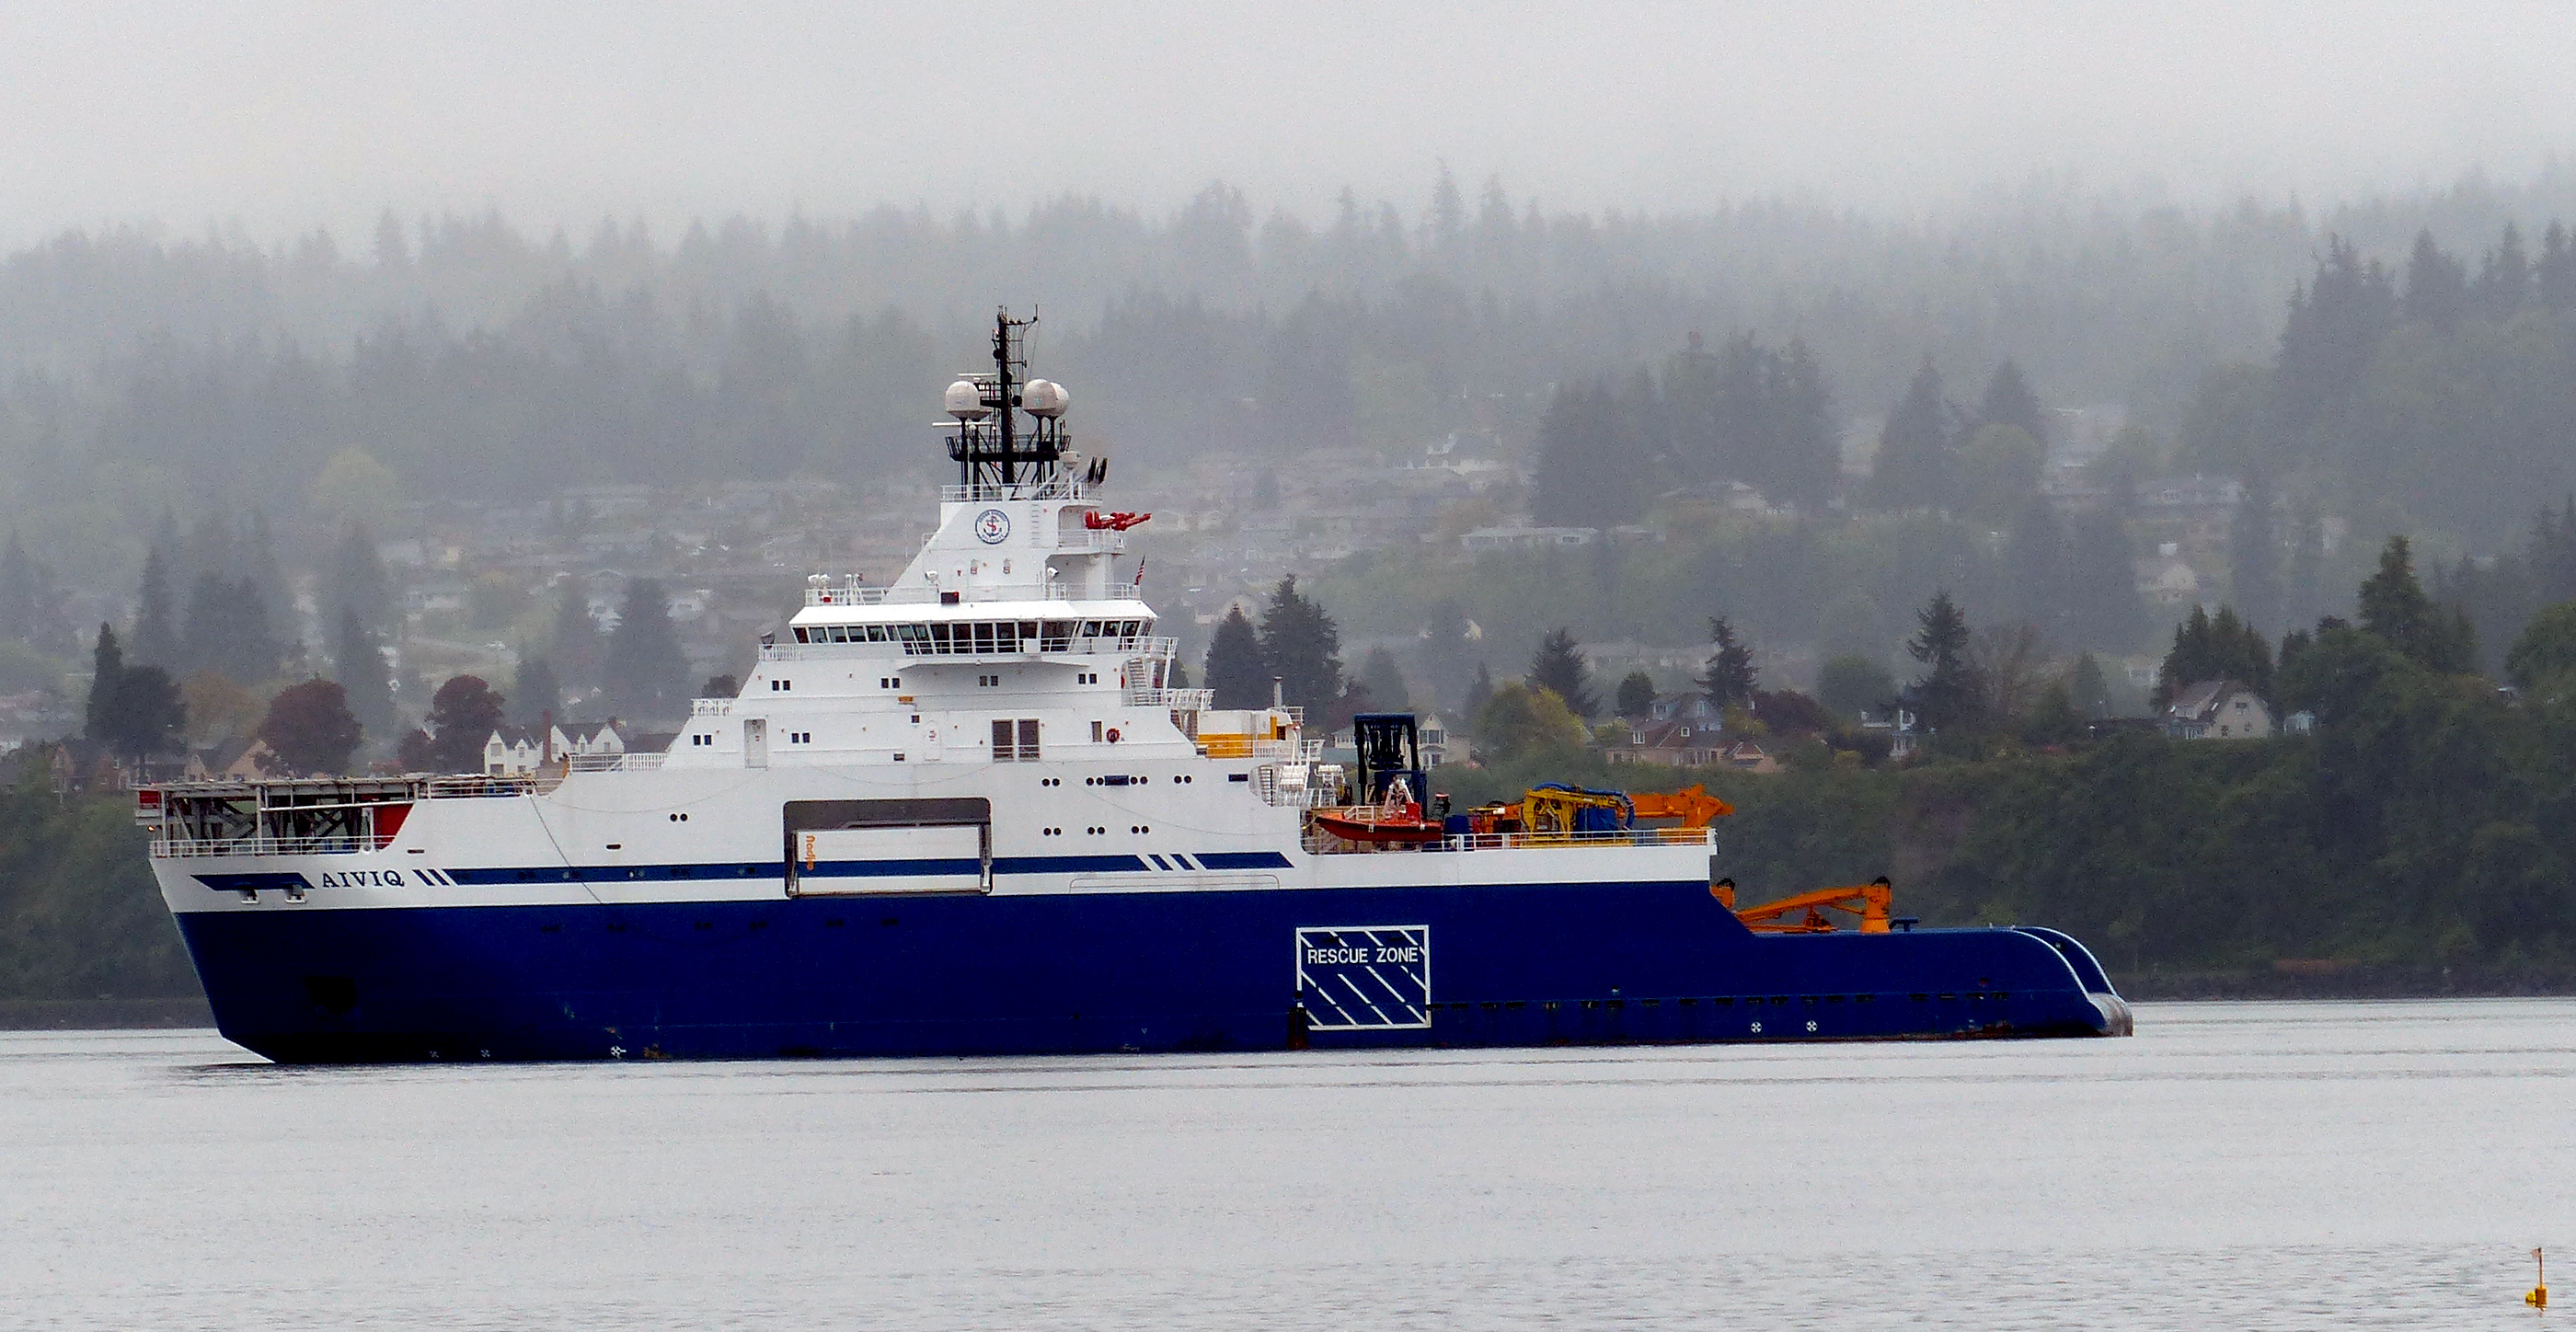 The Shell Oil-leased Aiviq sits anchored in Port Angeles Harbor after the big rig Polar Pioneer took off for Seattle on Thursday. The icebreaker tug supply vessel later joined the flotilla at the Port of Seattle. (David G. Sellars/for Peninsula Daily News)